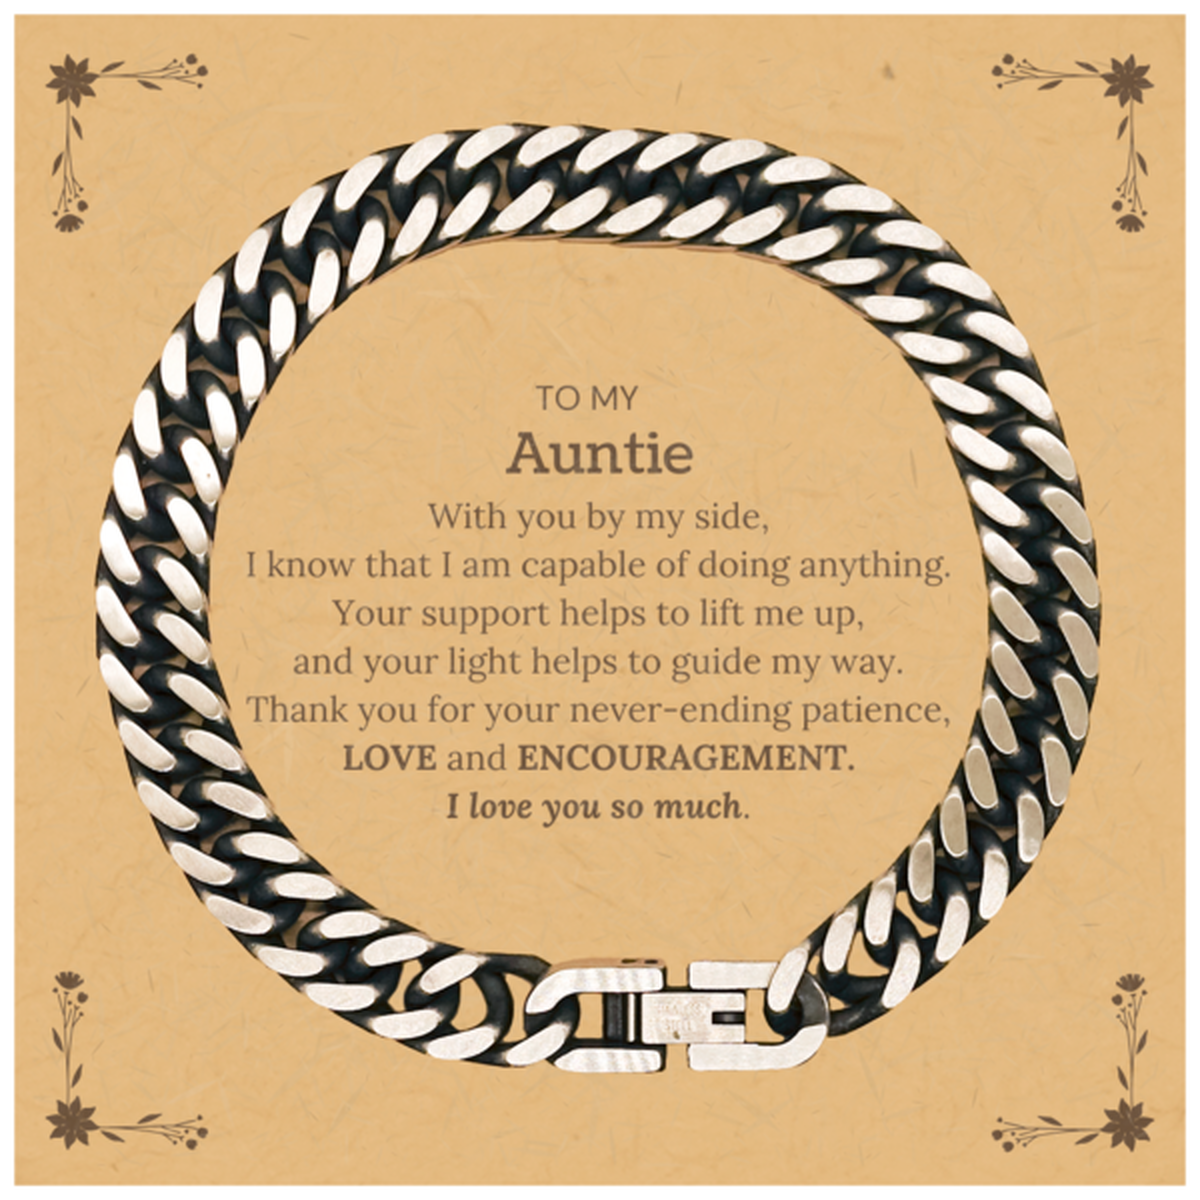 Appreciation Auntie Cuban Link Chain Bracelet Gifts, To My Auntie Birthday Christmas Wedding Keepsake Gifts for Auntie With you by my side, I know that I am capable of doing anything. I love you so much